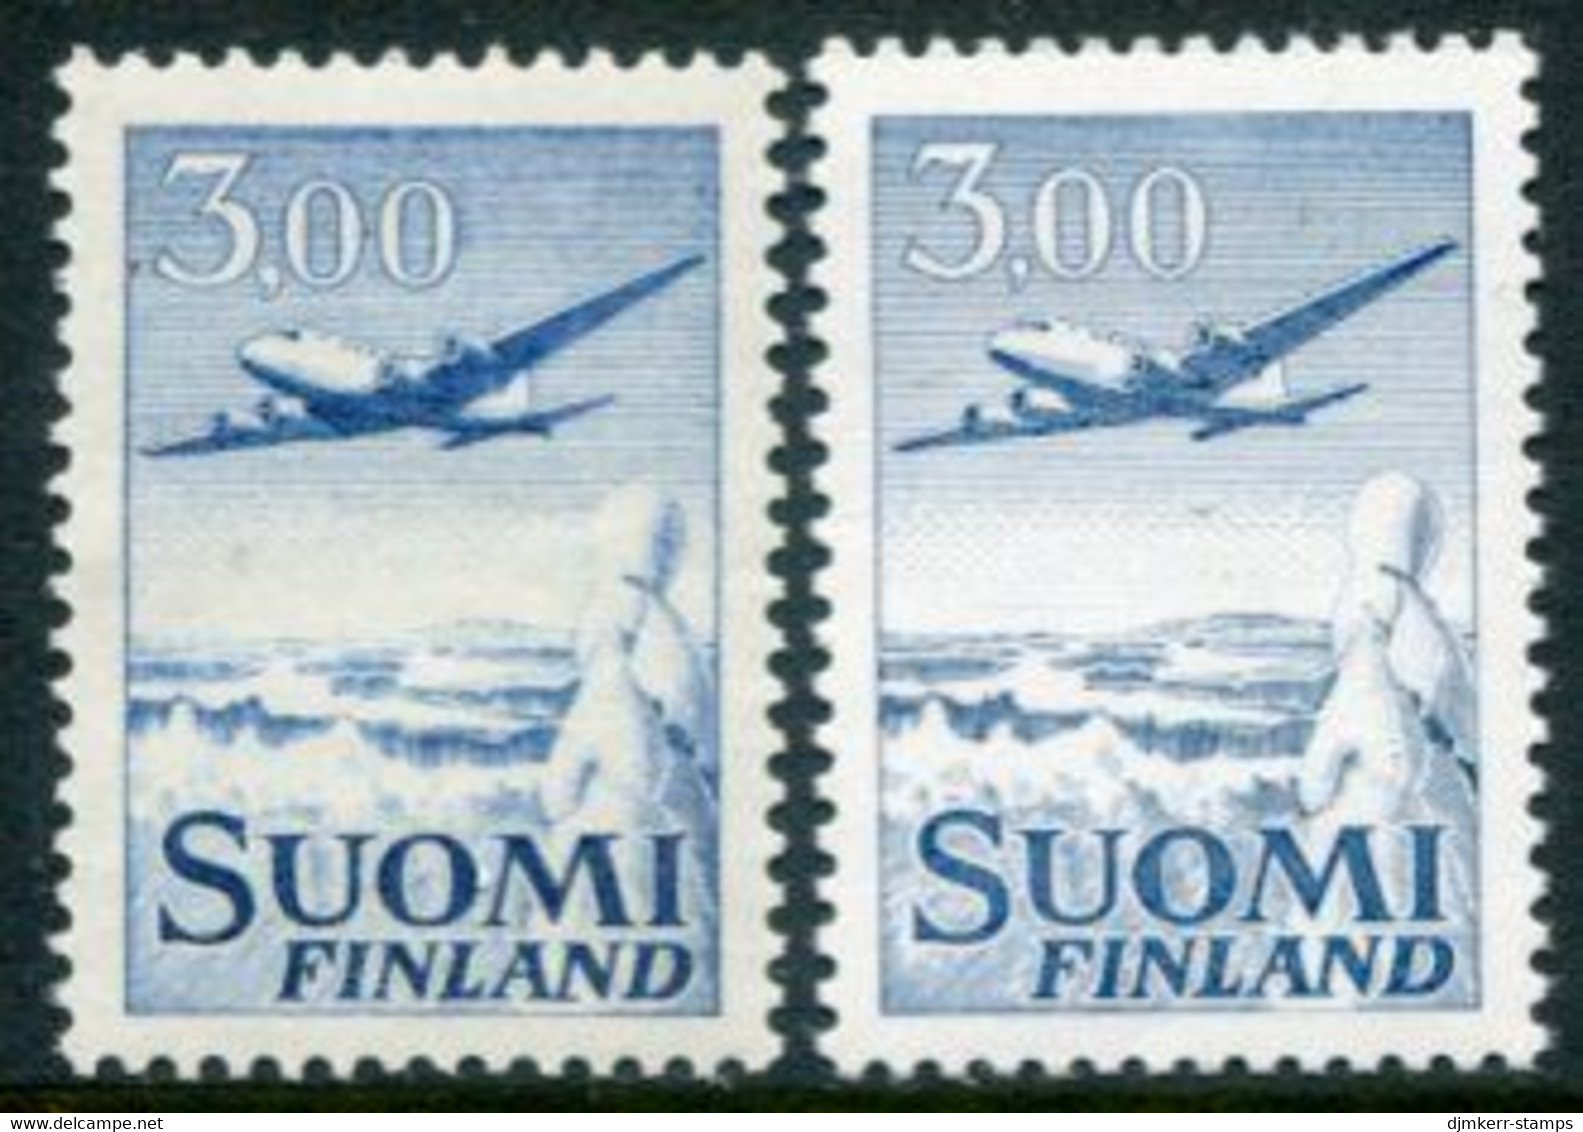 FINLAND 1963  Airmail 3.00 M. Both Types MNH / **  Michel 579x I, 579y II - Unused Stamps